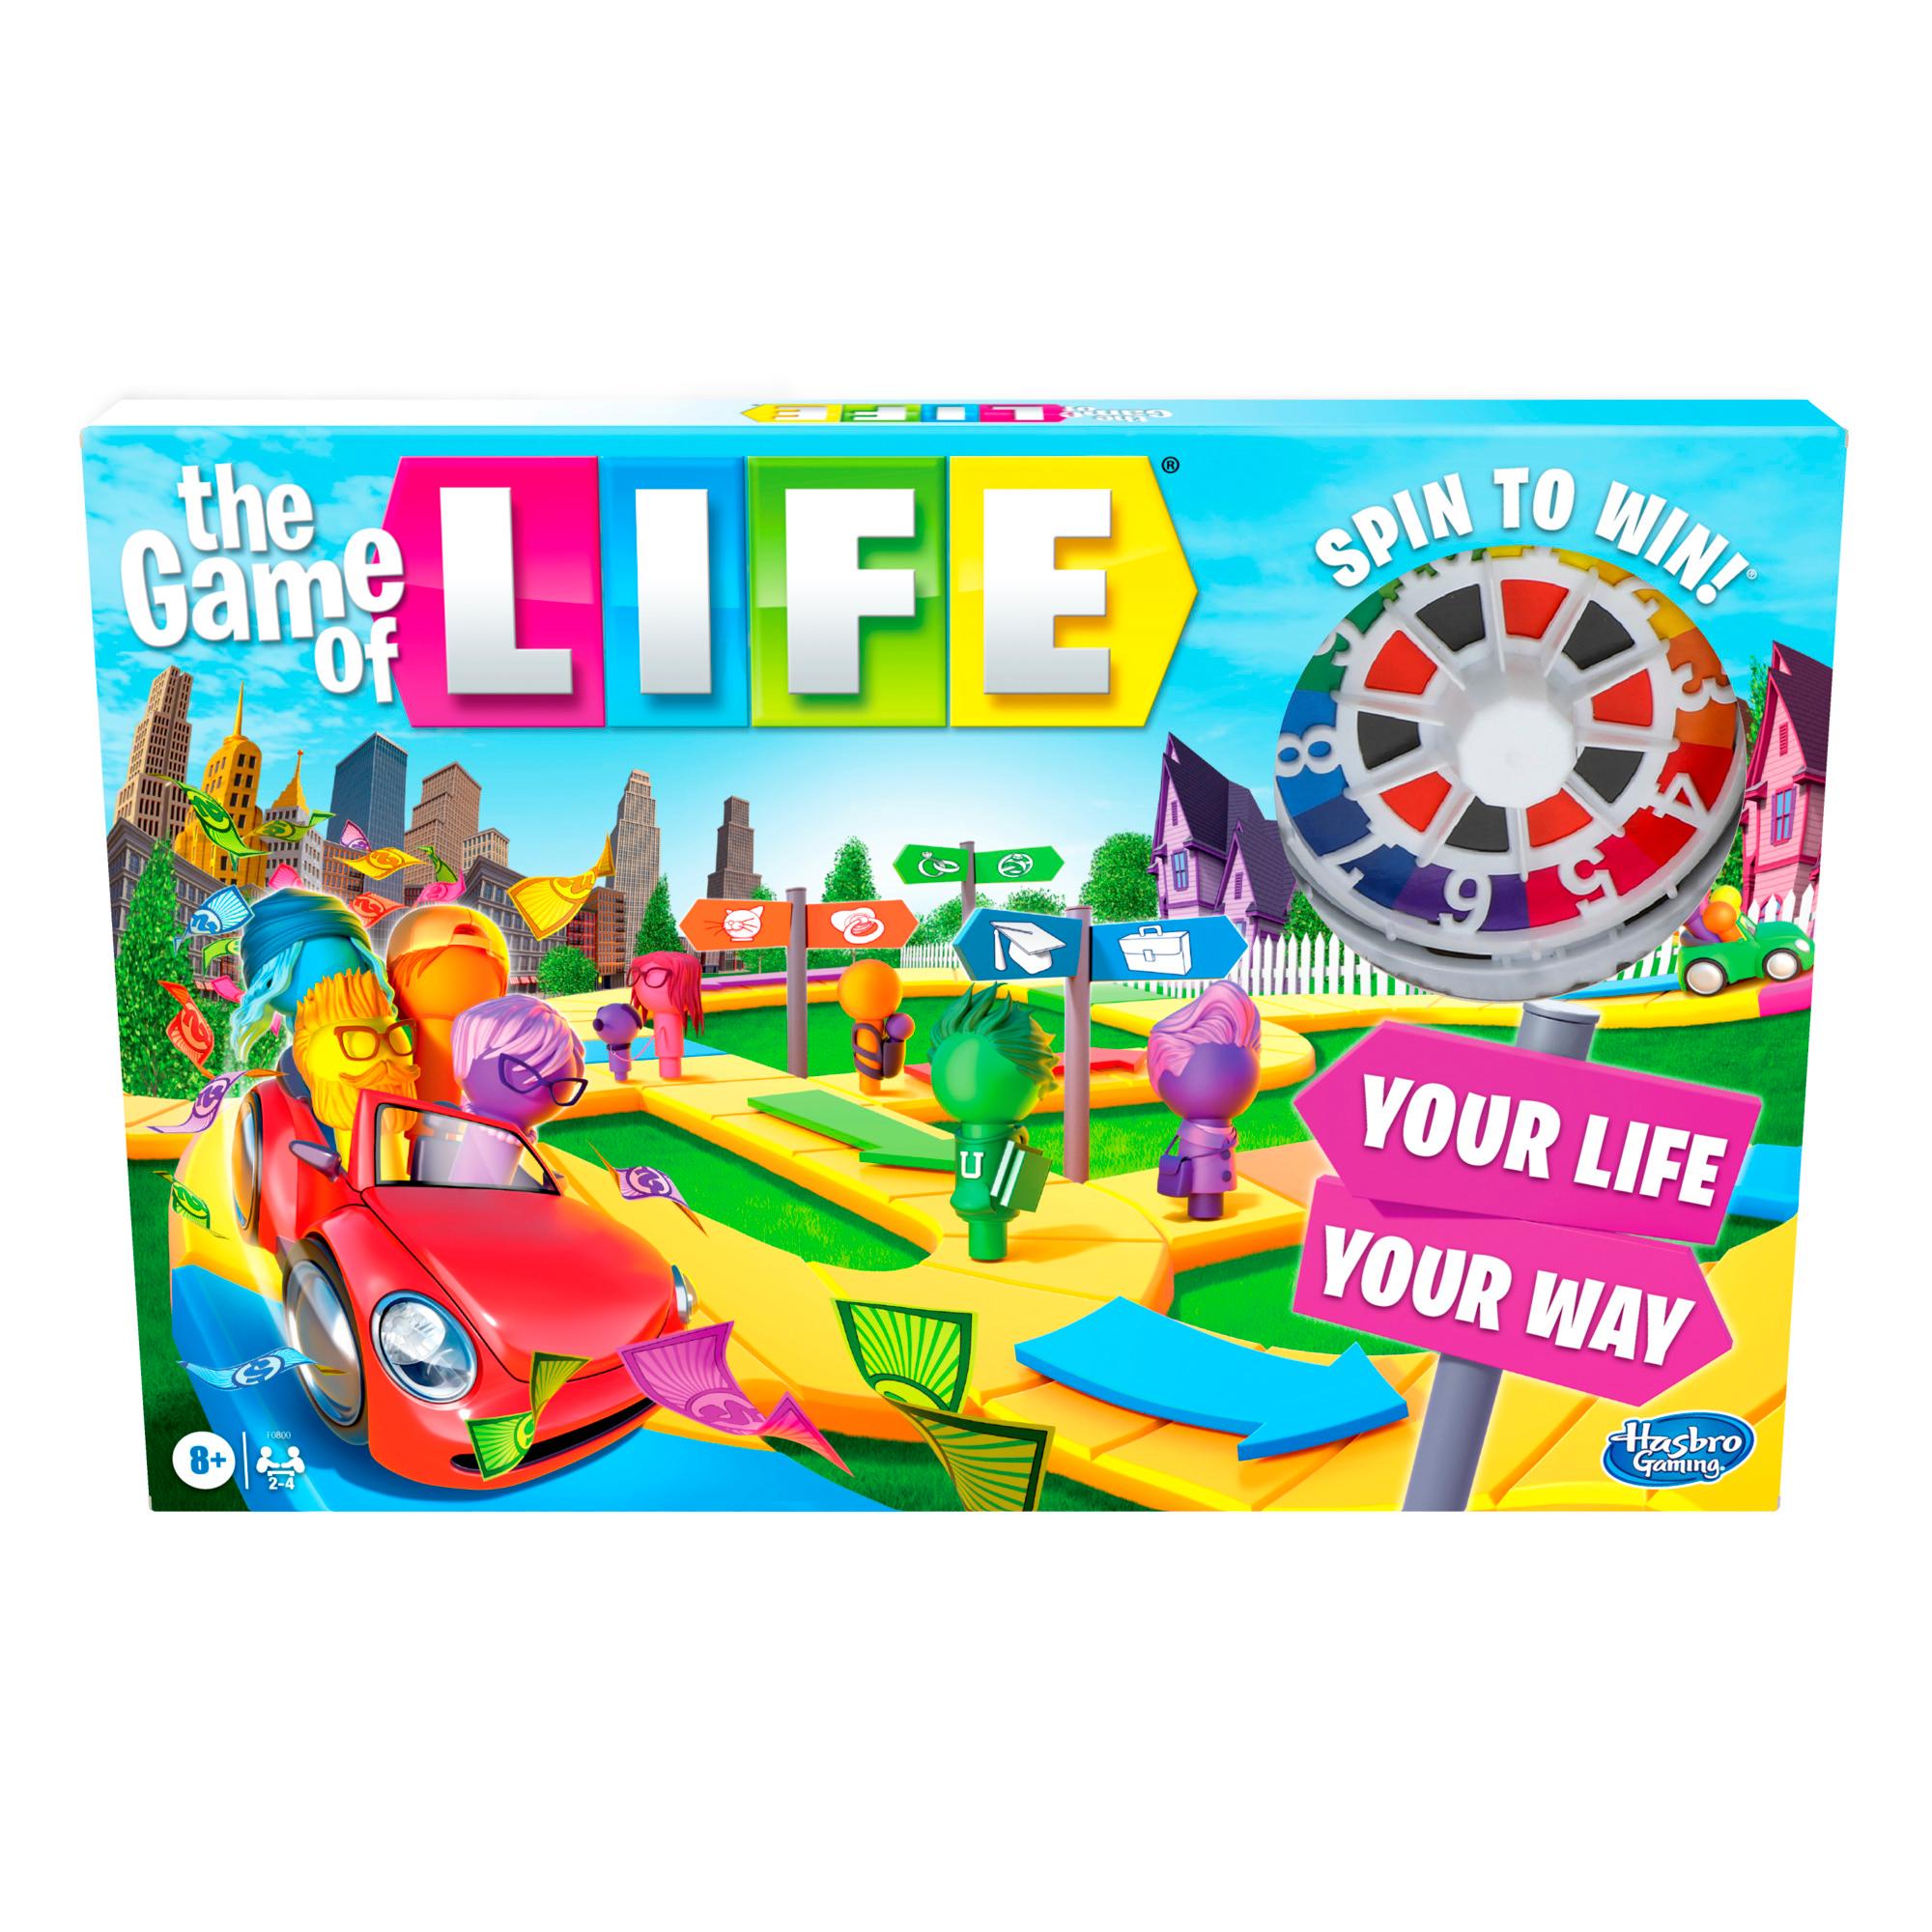 The Game of Life Replacement Parts Various Editions 1991 2007 2016 